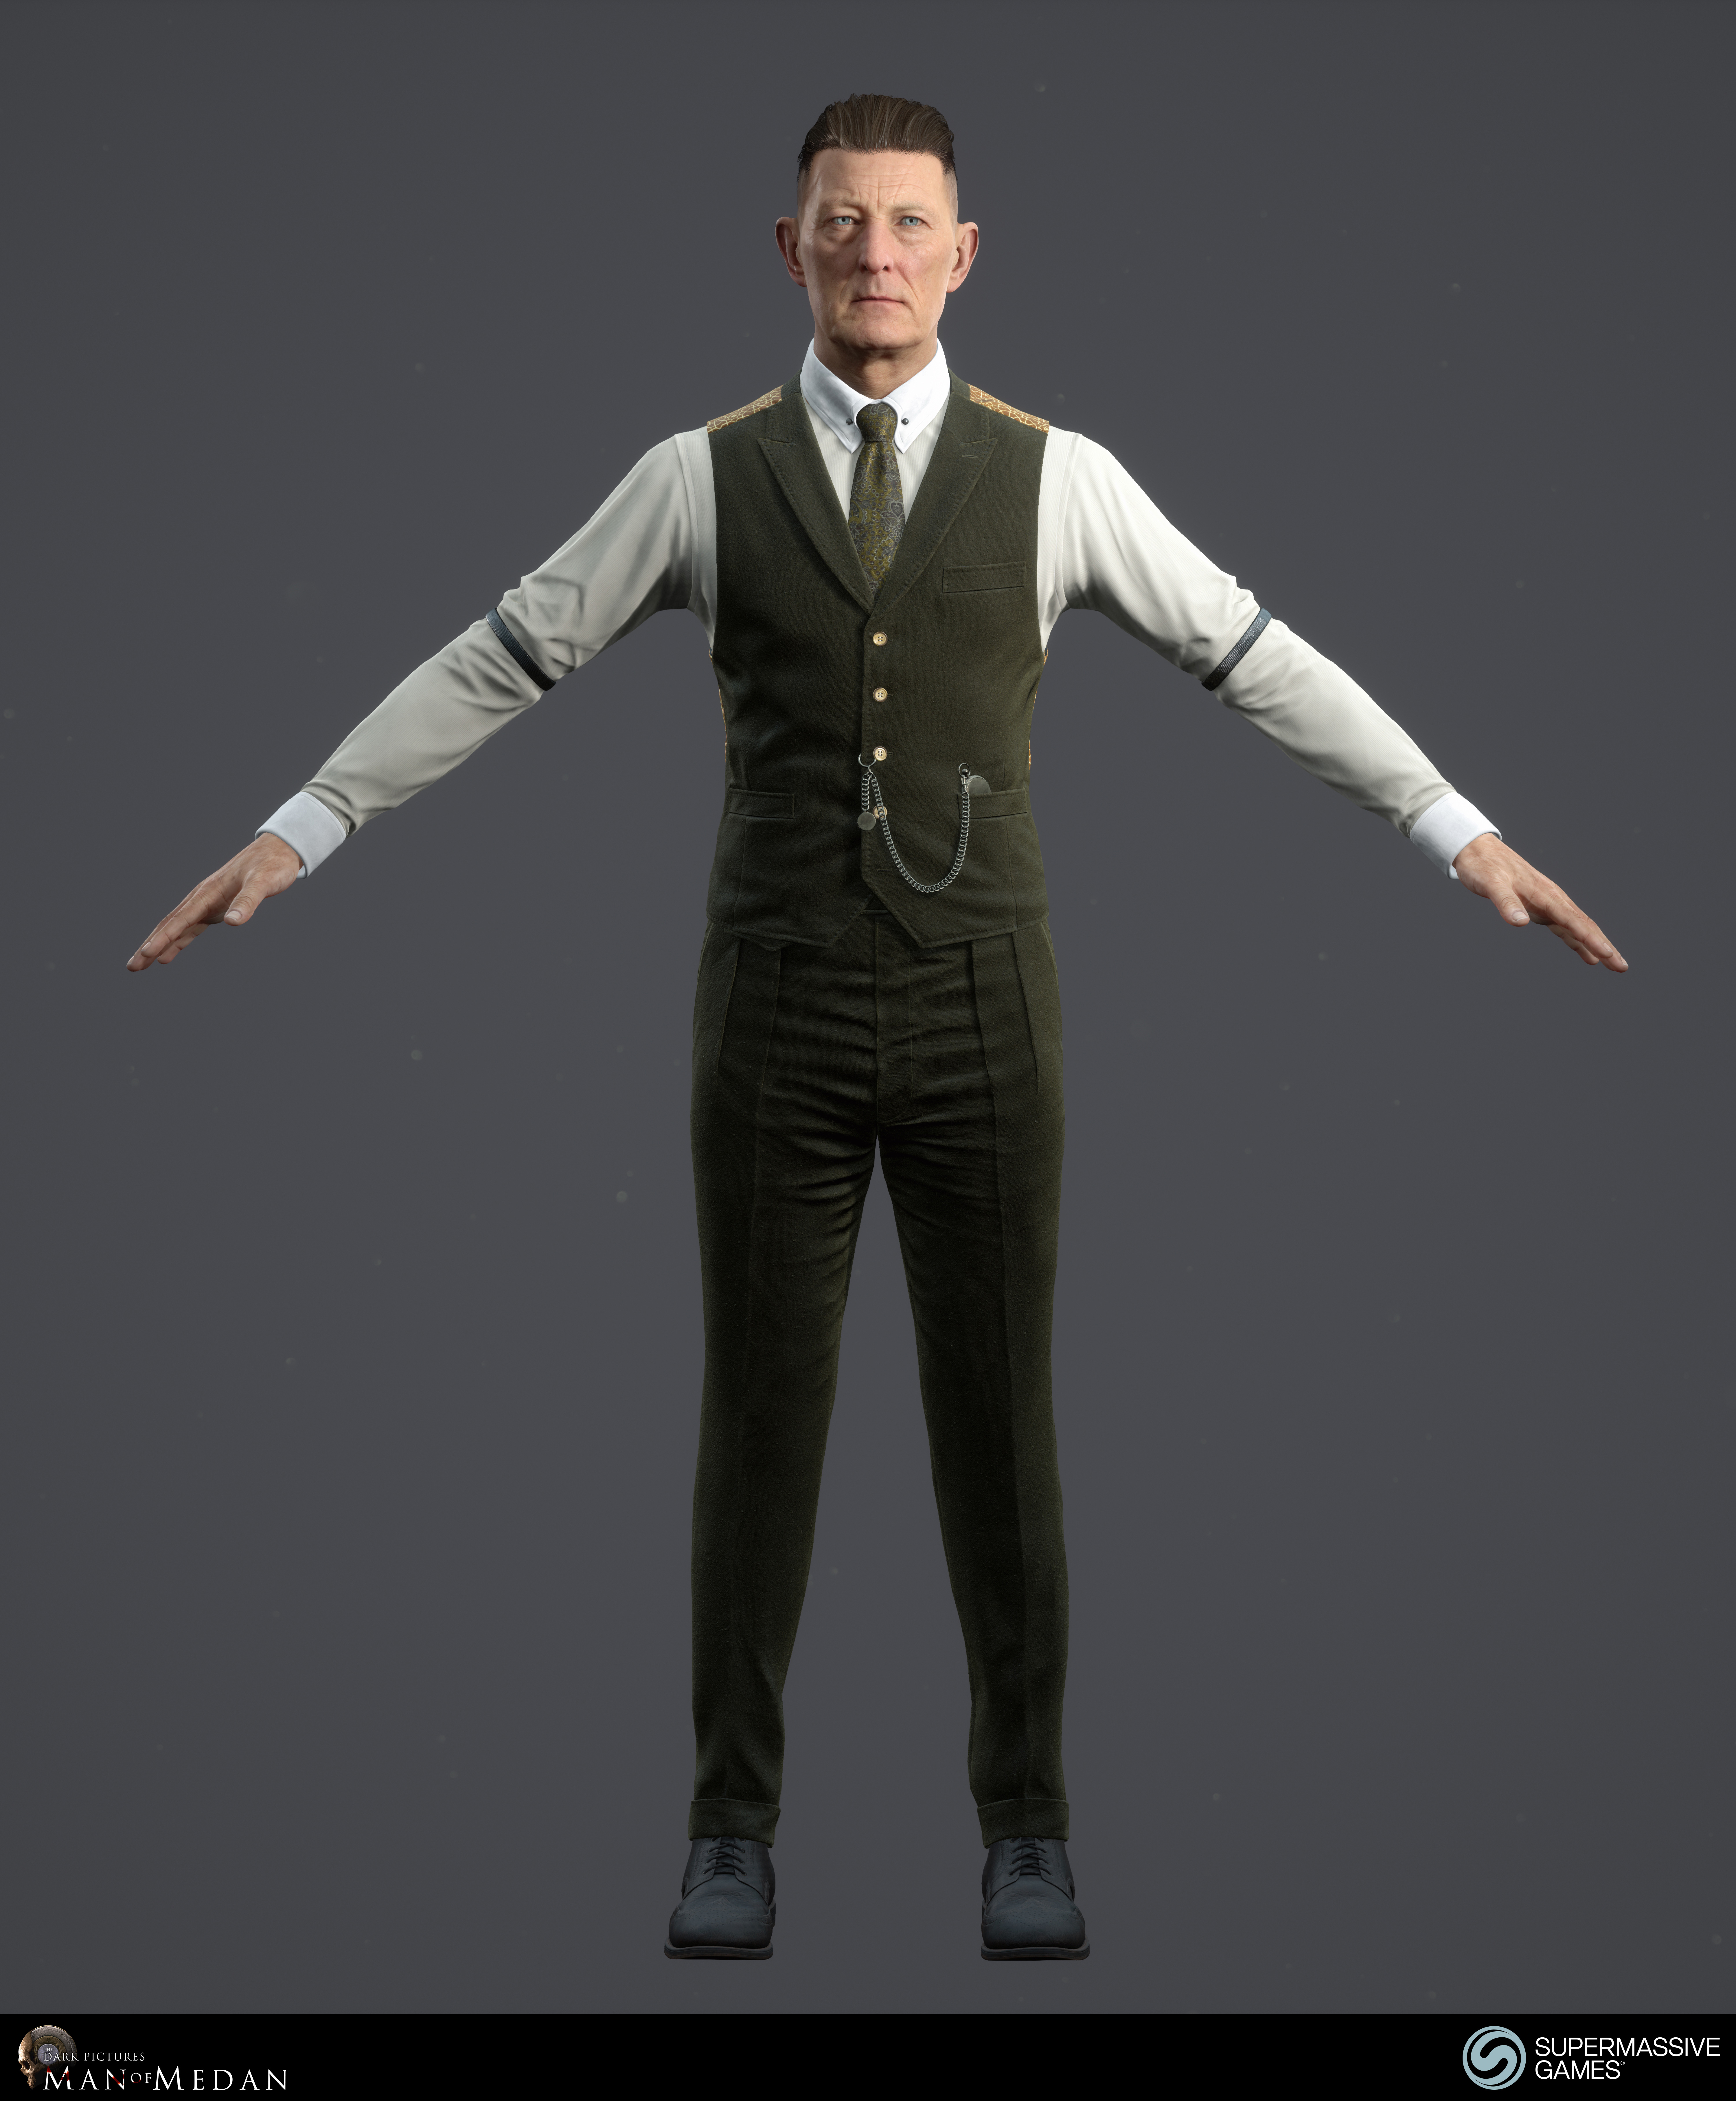 The Curator character from The Dark Pictures game in Unreal Engine. Cold hearted face with blue eyes, strong hold hair wax, elegant green costume, waistcoat, tie, pocket watch, sleeve garter. Andor Kollar